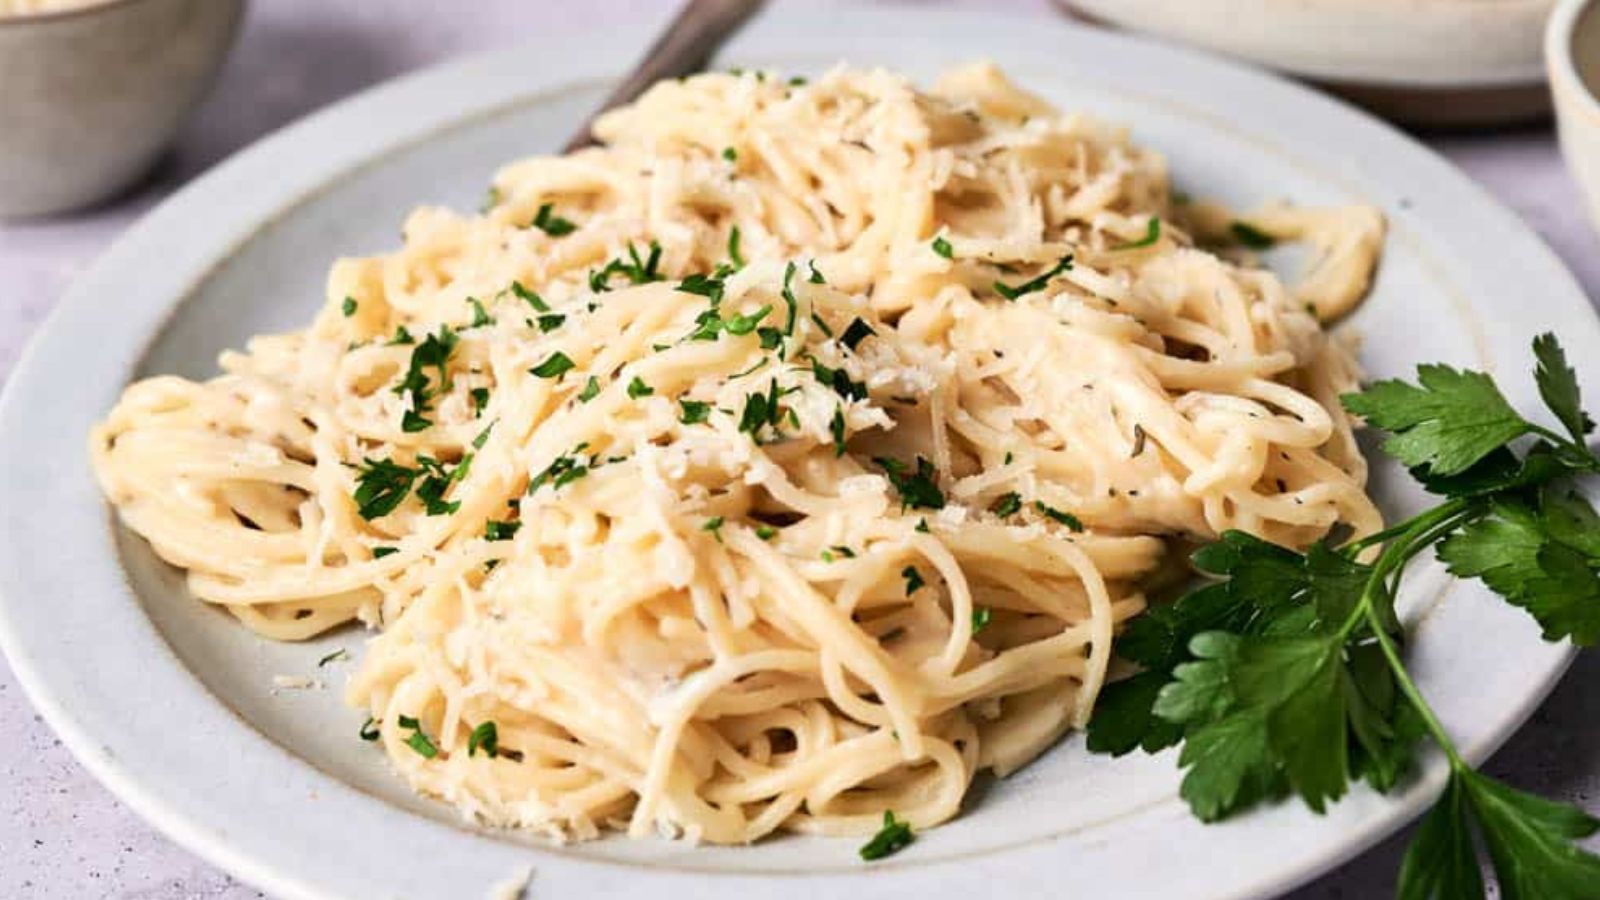 <p>Craving creamy and indulgent pasta dish that’s completely plant-based? Vegan Alfredo Pasta is the answer to your prayers. Plus, it’s quick and easy to prepare, making it perfect for busy weeknights when you need dinner on the table fast.<br><strong>Get the Recipe: </strong><a href="https://twocityvegans.com/vegan-alfredo-pasta/?utm_source=msn&utm_medium=page&utm_campaign=Prepare%20for%20battle:%2015%20italian%20dishes%20worth%20fighting%20for">Vegan Alfredo Pasta</a></p>